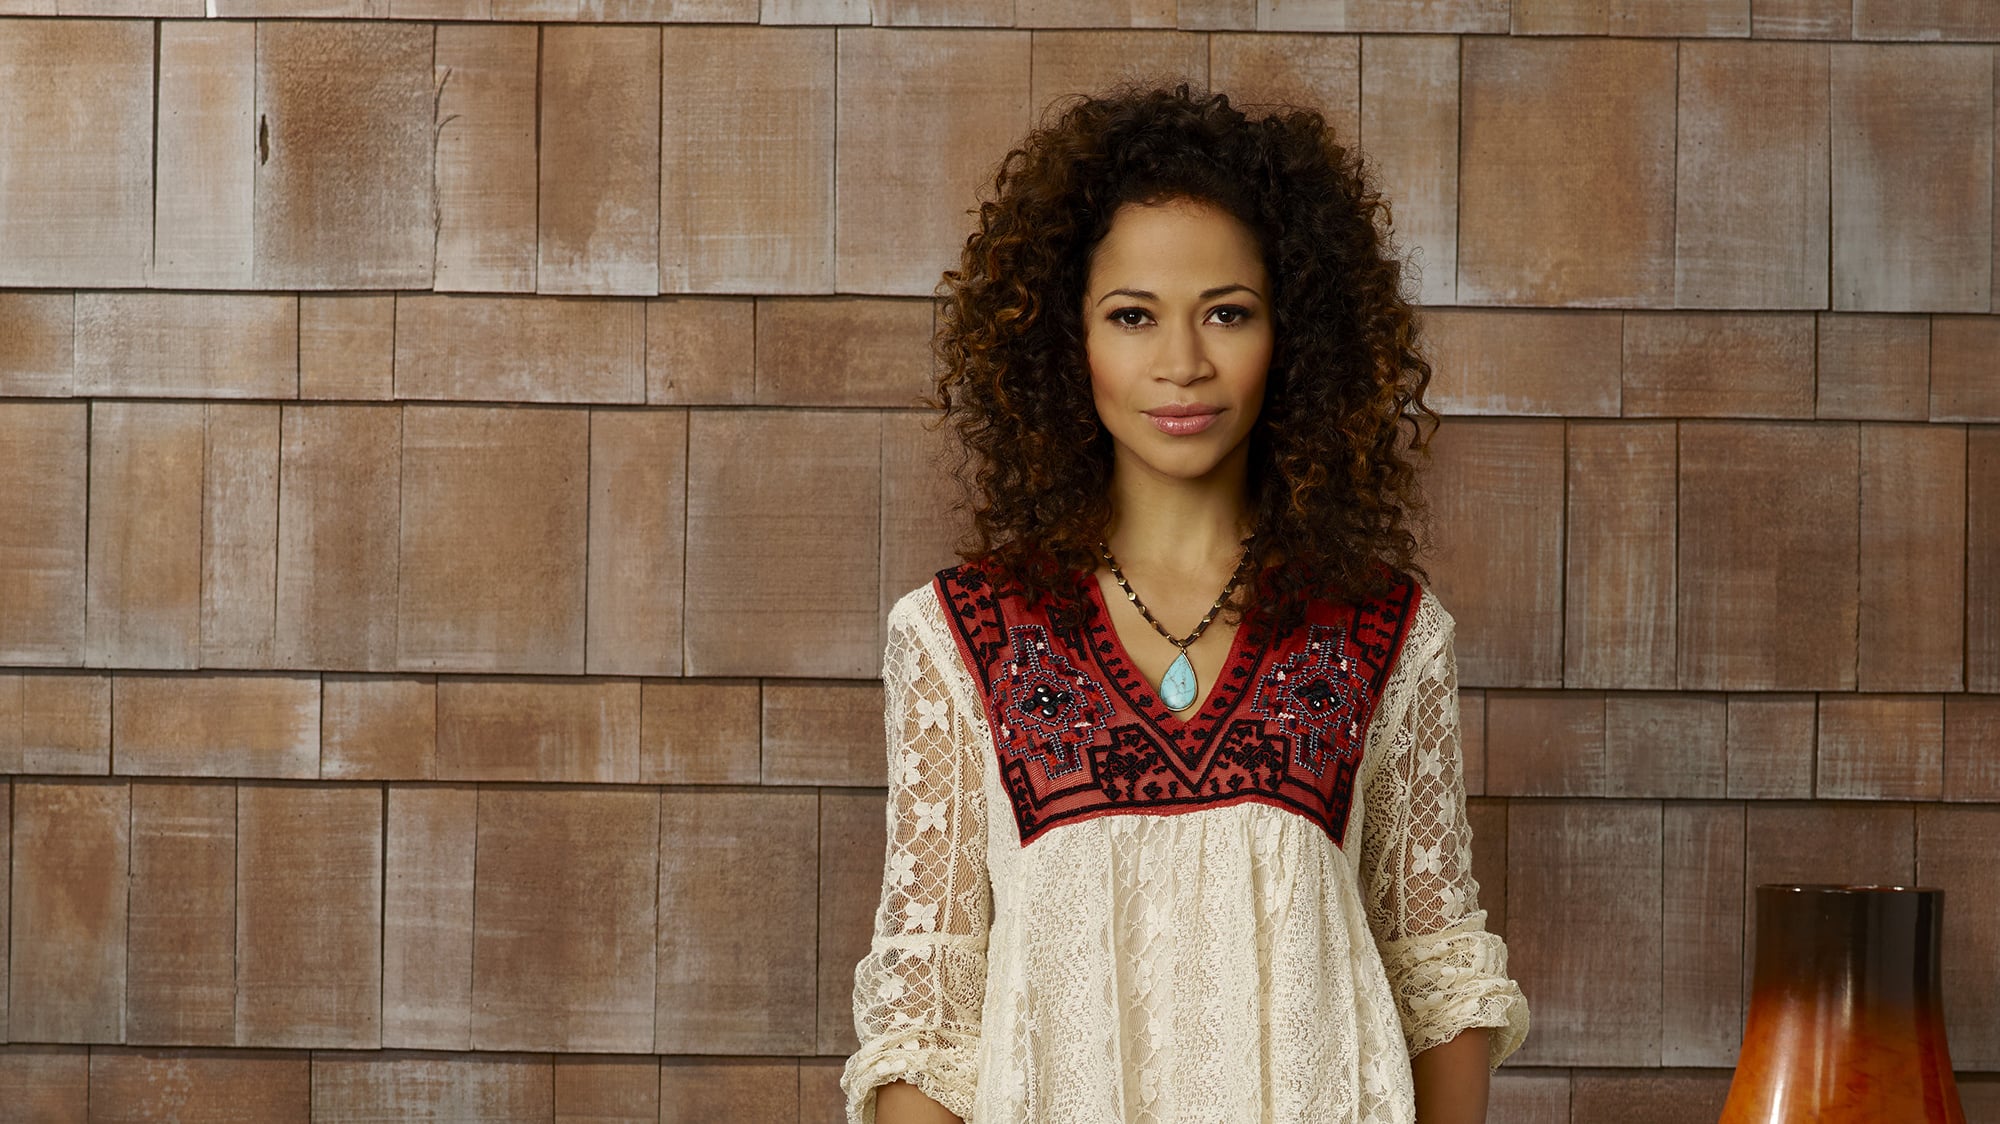 the fosters wallpaper,hair,clothing,hairstyle,beauty,maroon